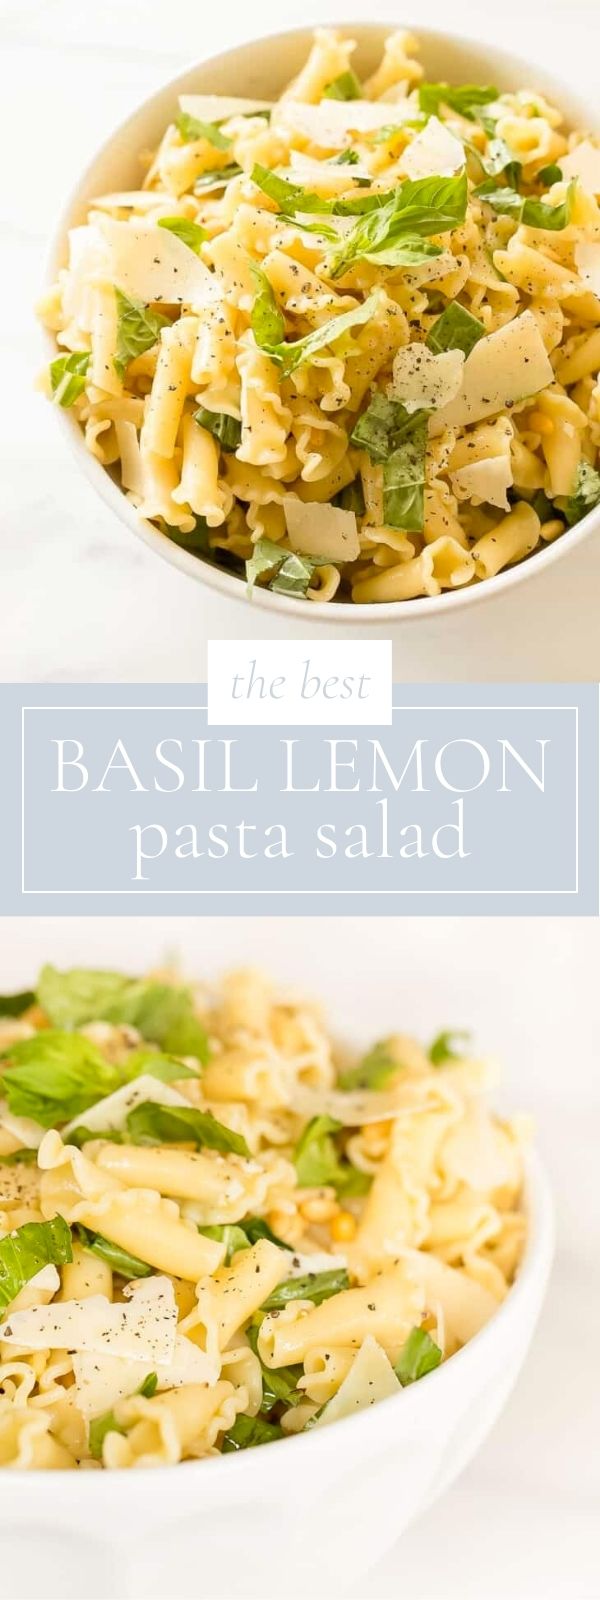 On a marble counter, there is a round white bowl of basil lemon pasta salad.